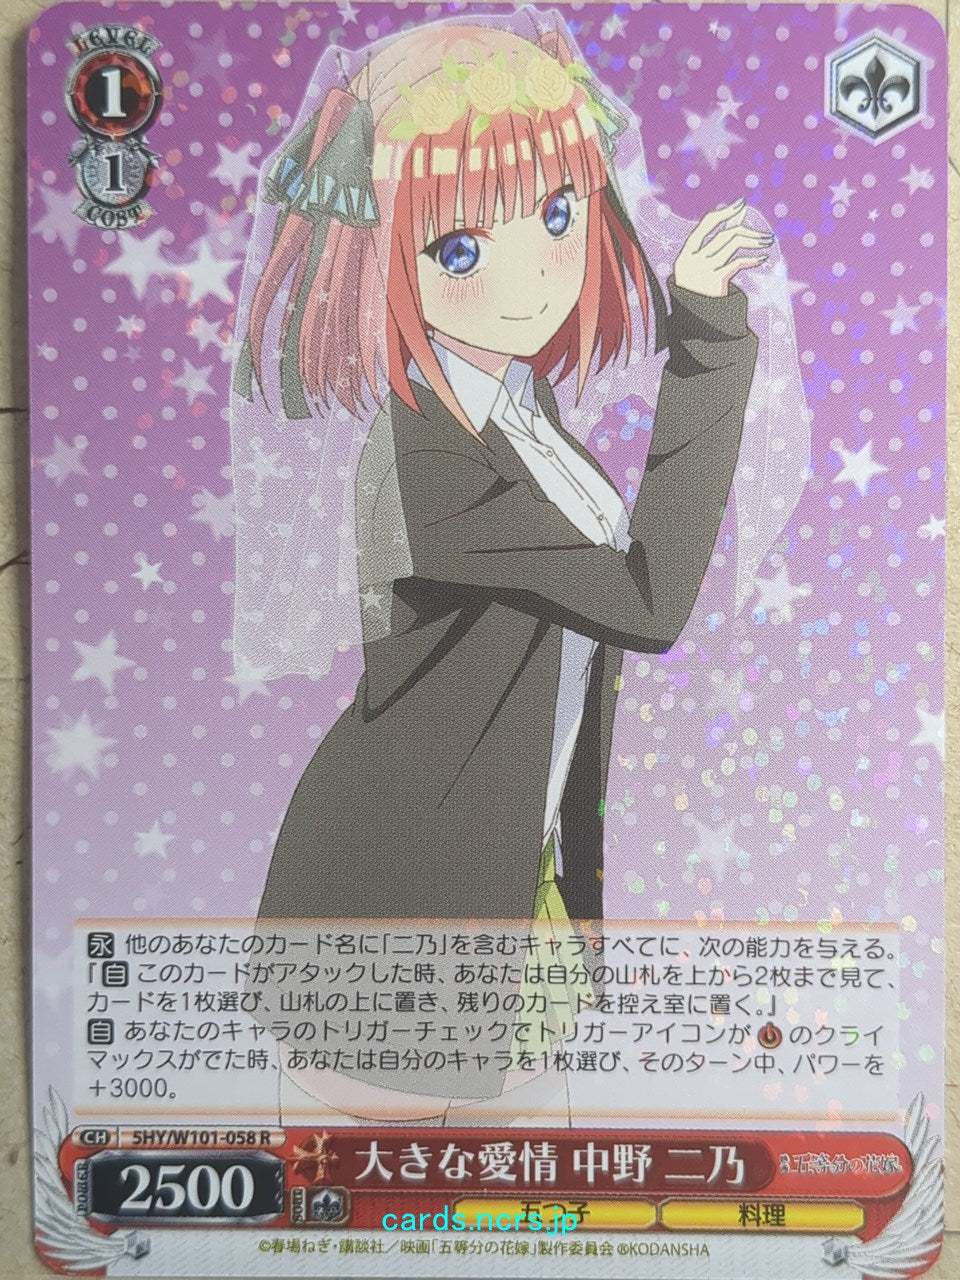 Weiss Schwarz The Quintessential Quintuplets -Nino Nakano-   Trading Card 5HY/W101-058R